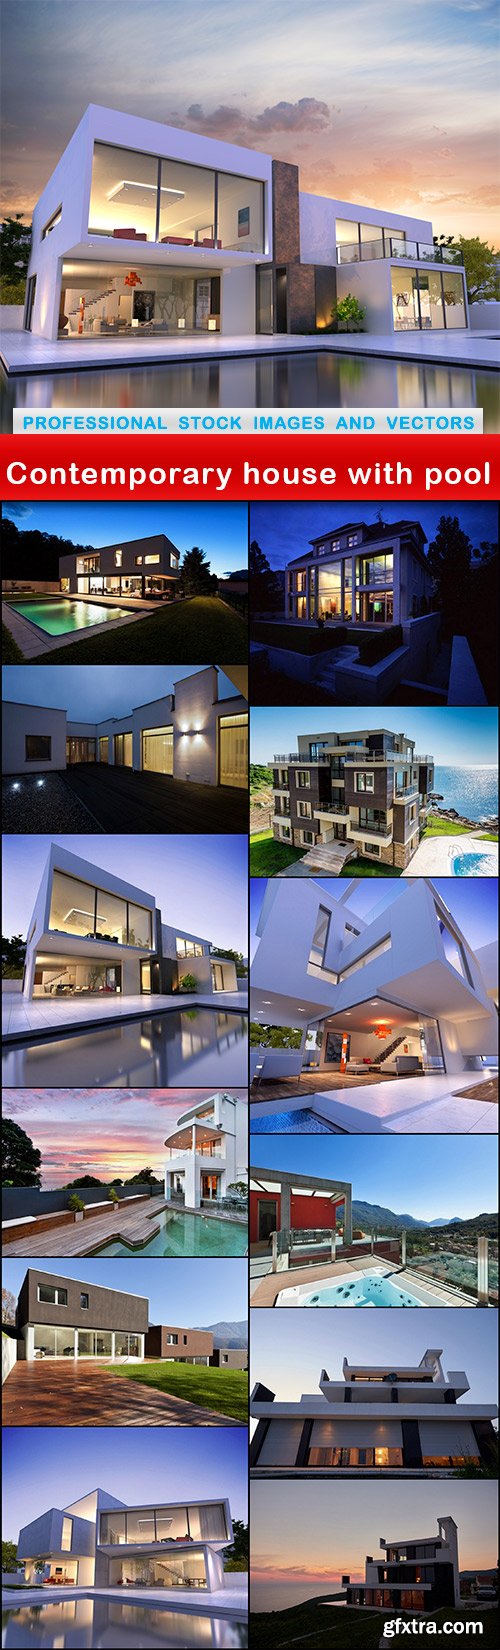 Contemporary house with pool - 13 UHQ JPEG